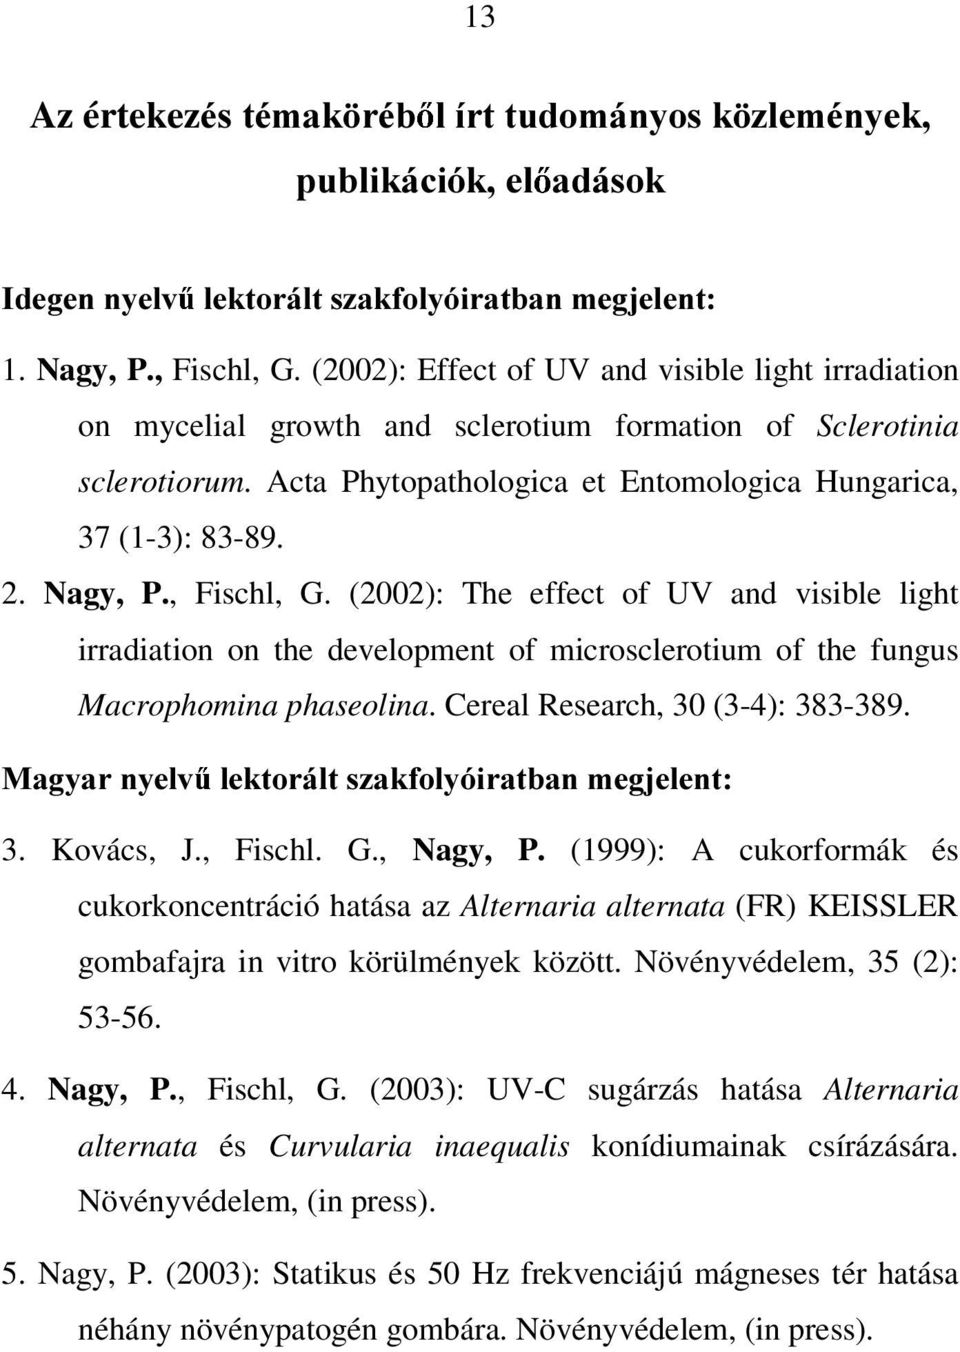 Nagy, P., Fischl, G. (2002): The effect of UV and visible light irradiation on the development of microsclerotium of the fungus Macrophomina phaseolina. Cereal Research, 30 (3-4): 383-389.